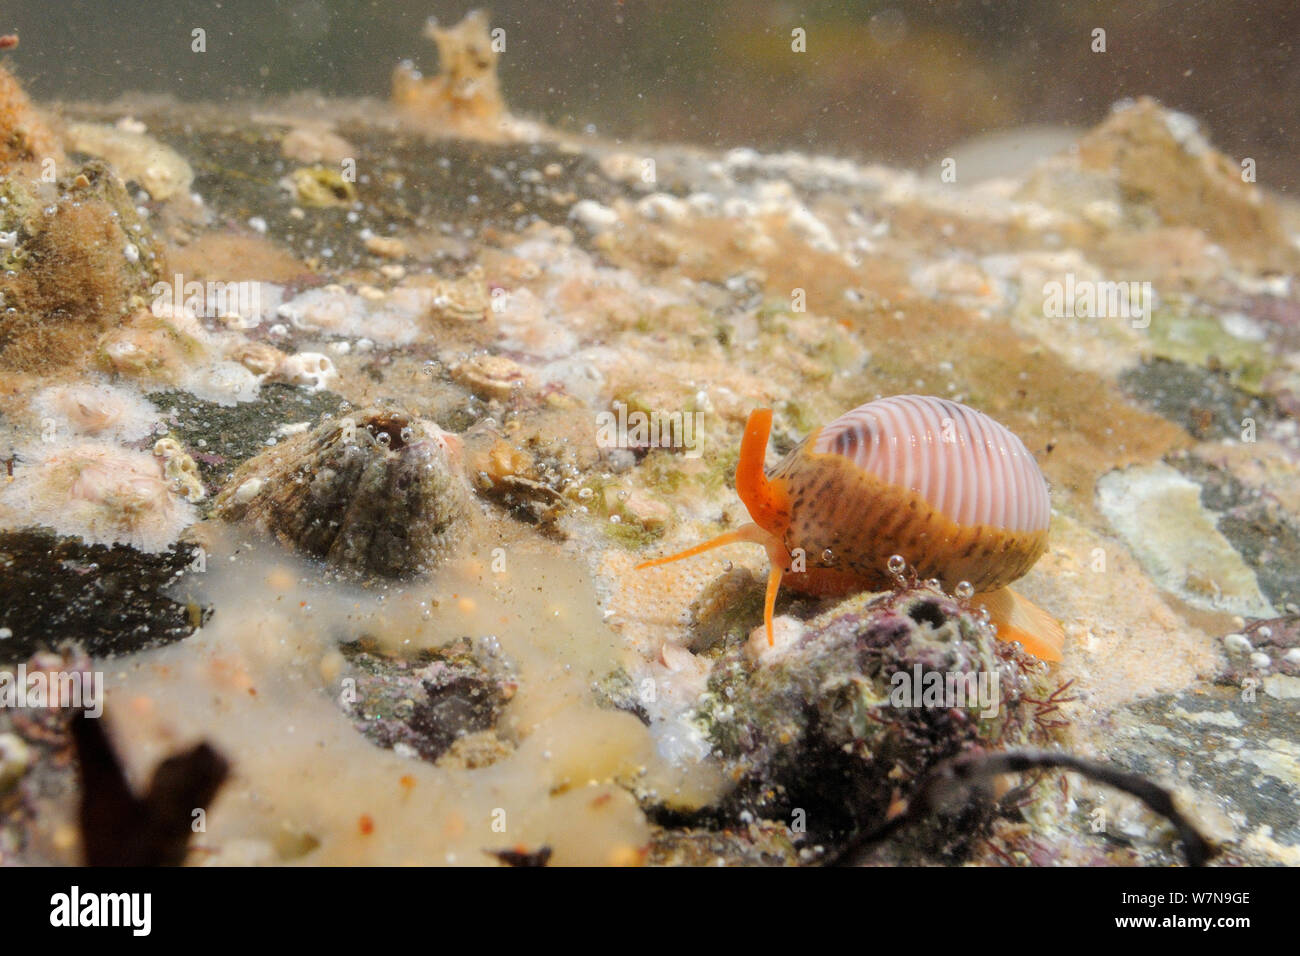 Spotted cowrie (Trivia monacha) crawling over subtidal rock encrusted with barnacles, serpulid worm tubes and sponges, with siphon, tentacles and eye visible, near Falmouth, Cornwall, UK, August. Stock Photo